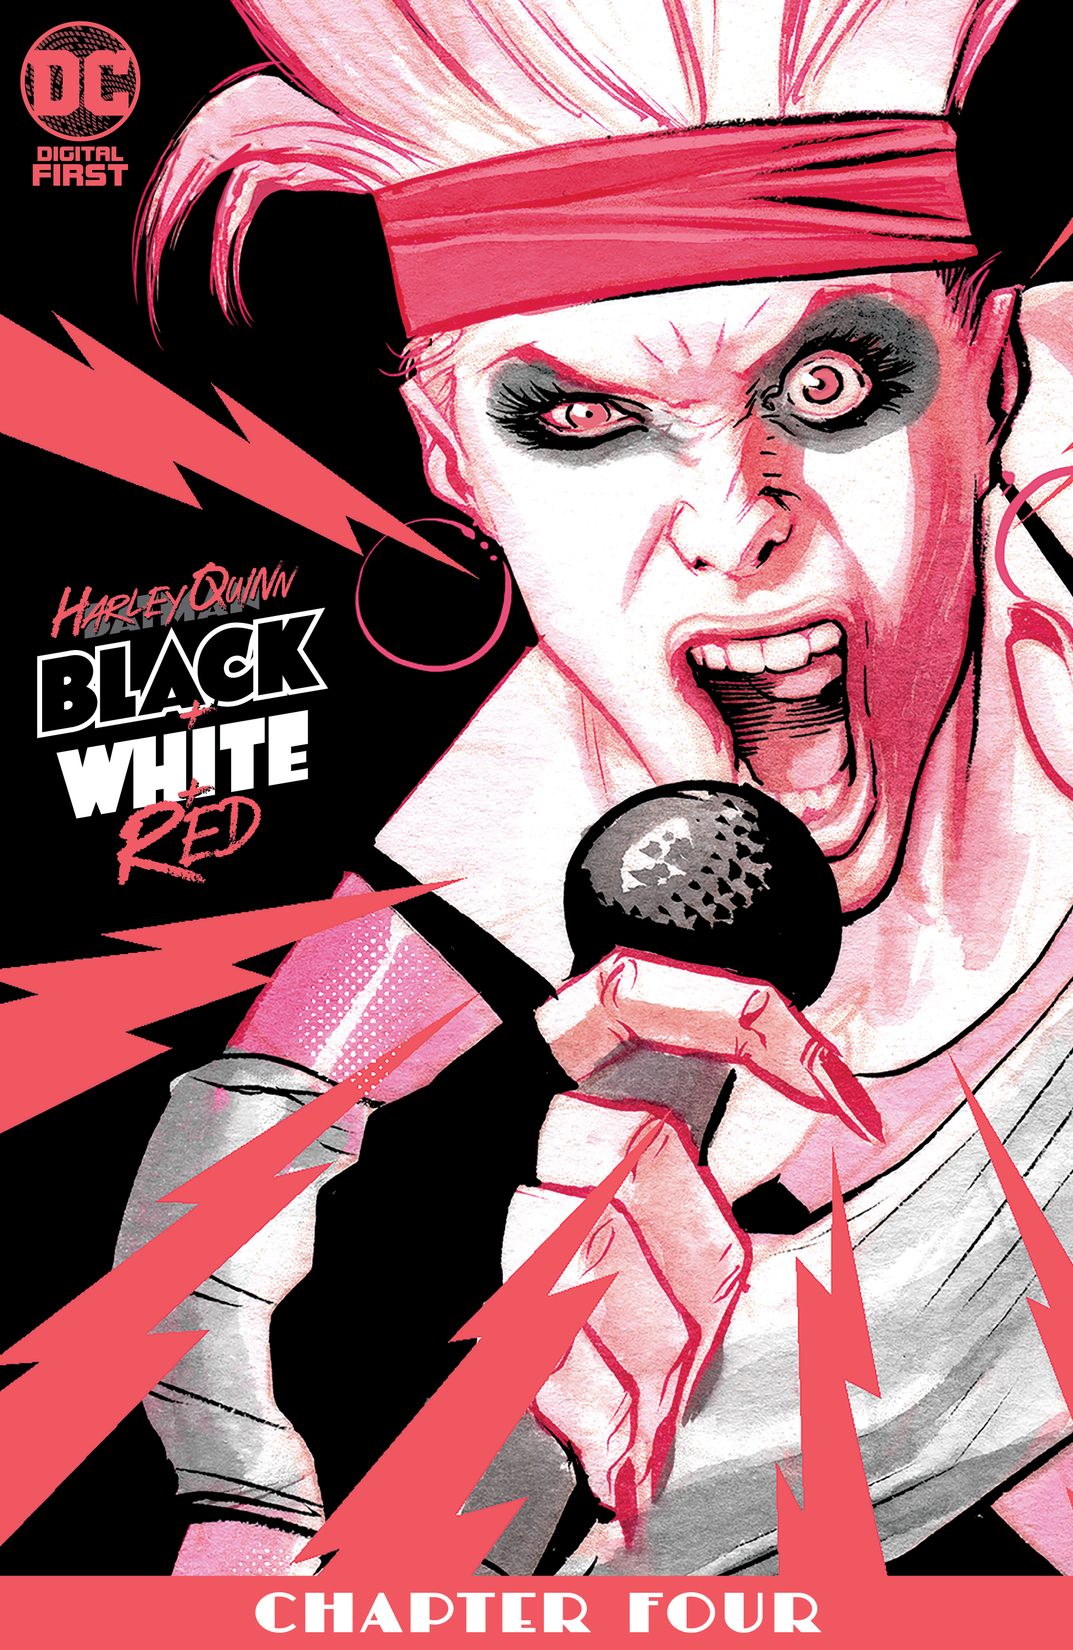 Harley Quinn Black + White + Red #4 preview images